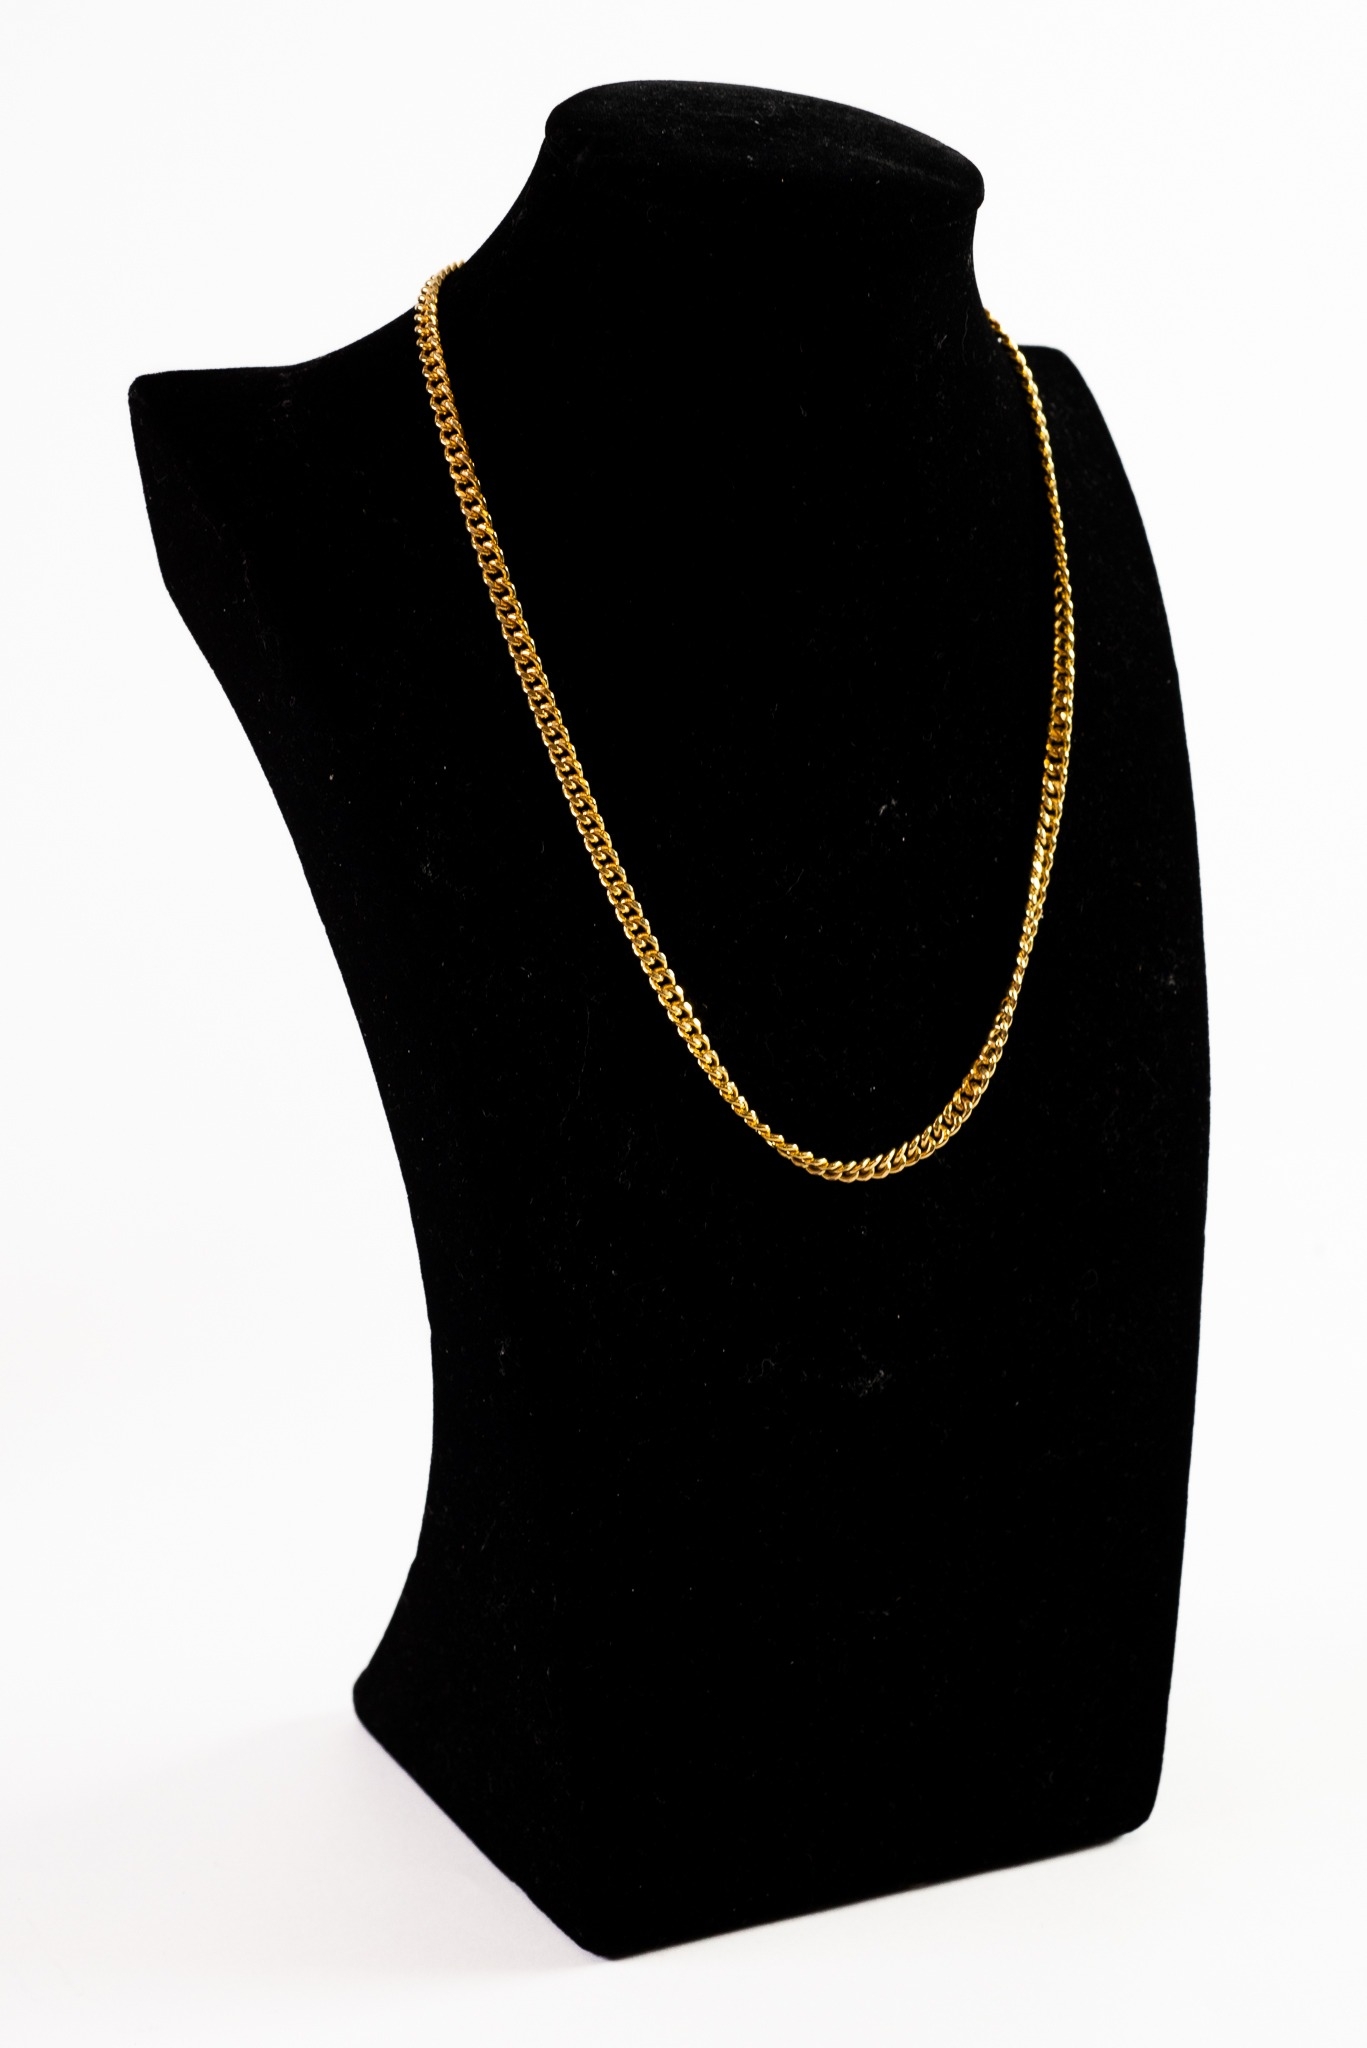 9ct GOLD CURB LINK CHAIN NECKLACE with bayonet catch, 18 1/2in (47cm) long, 10gms